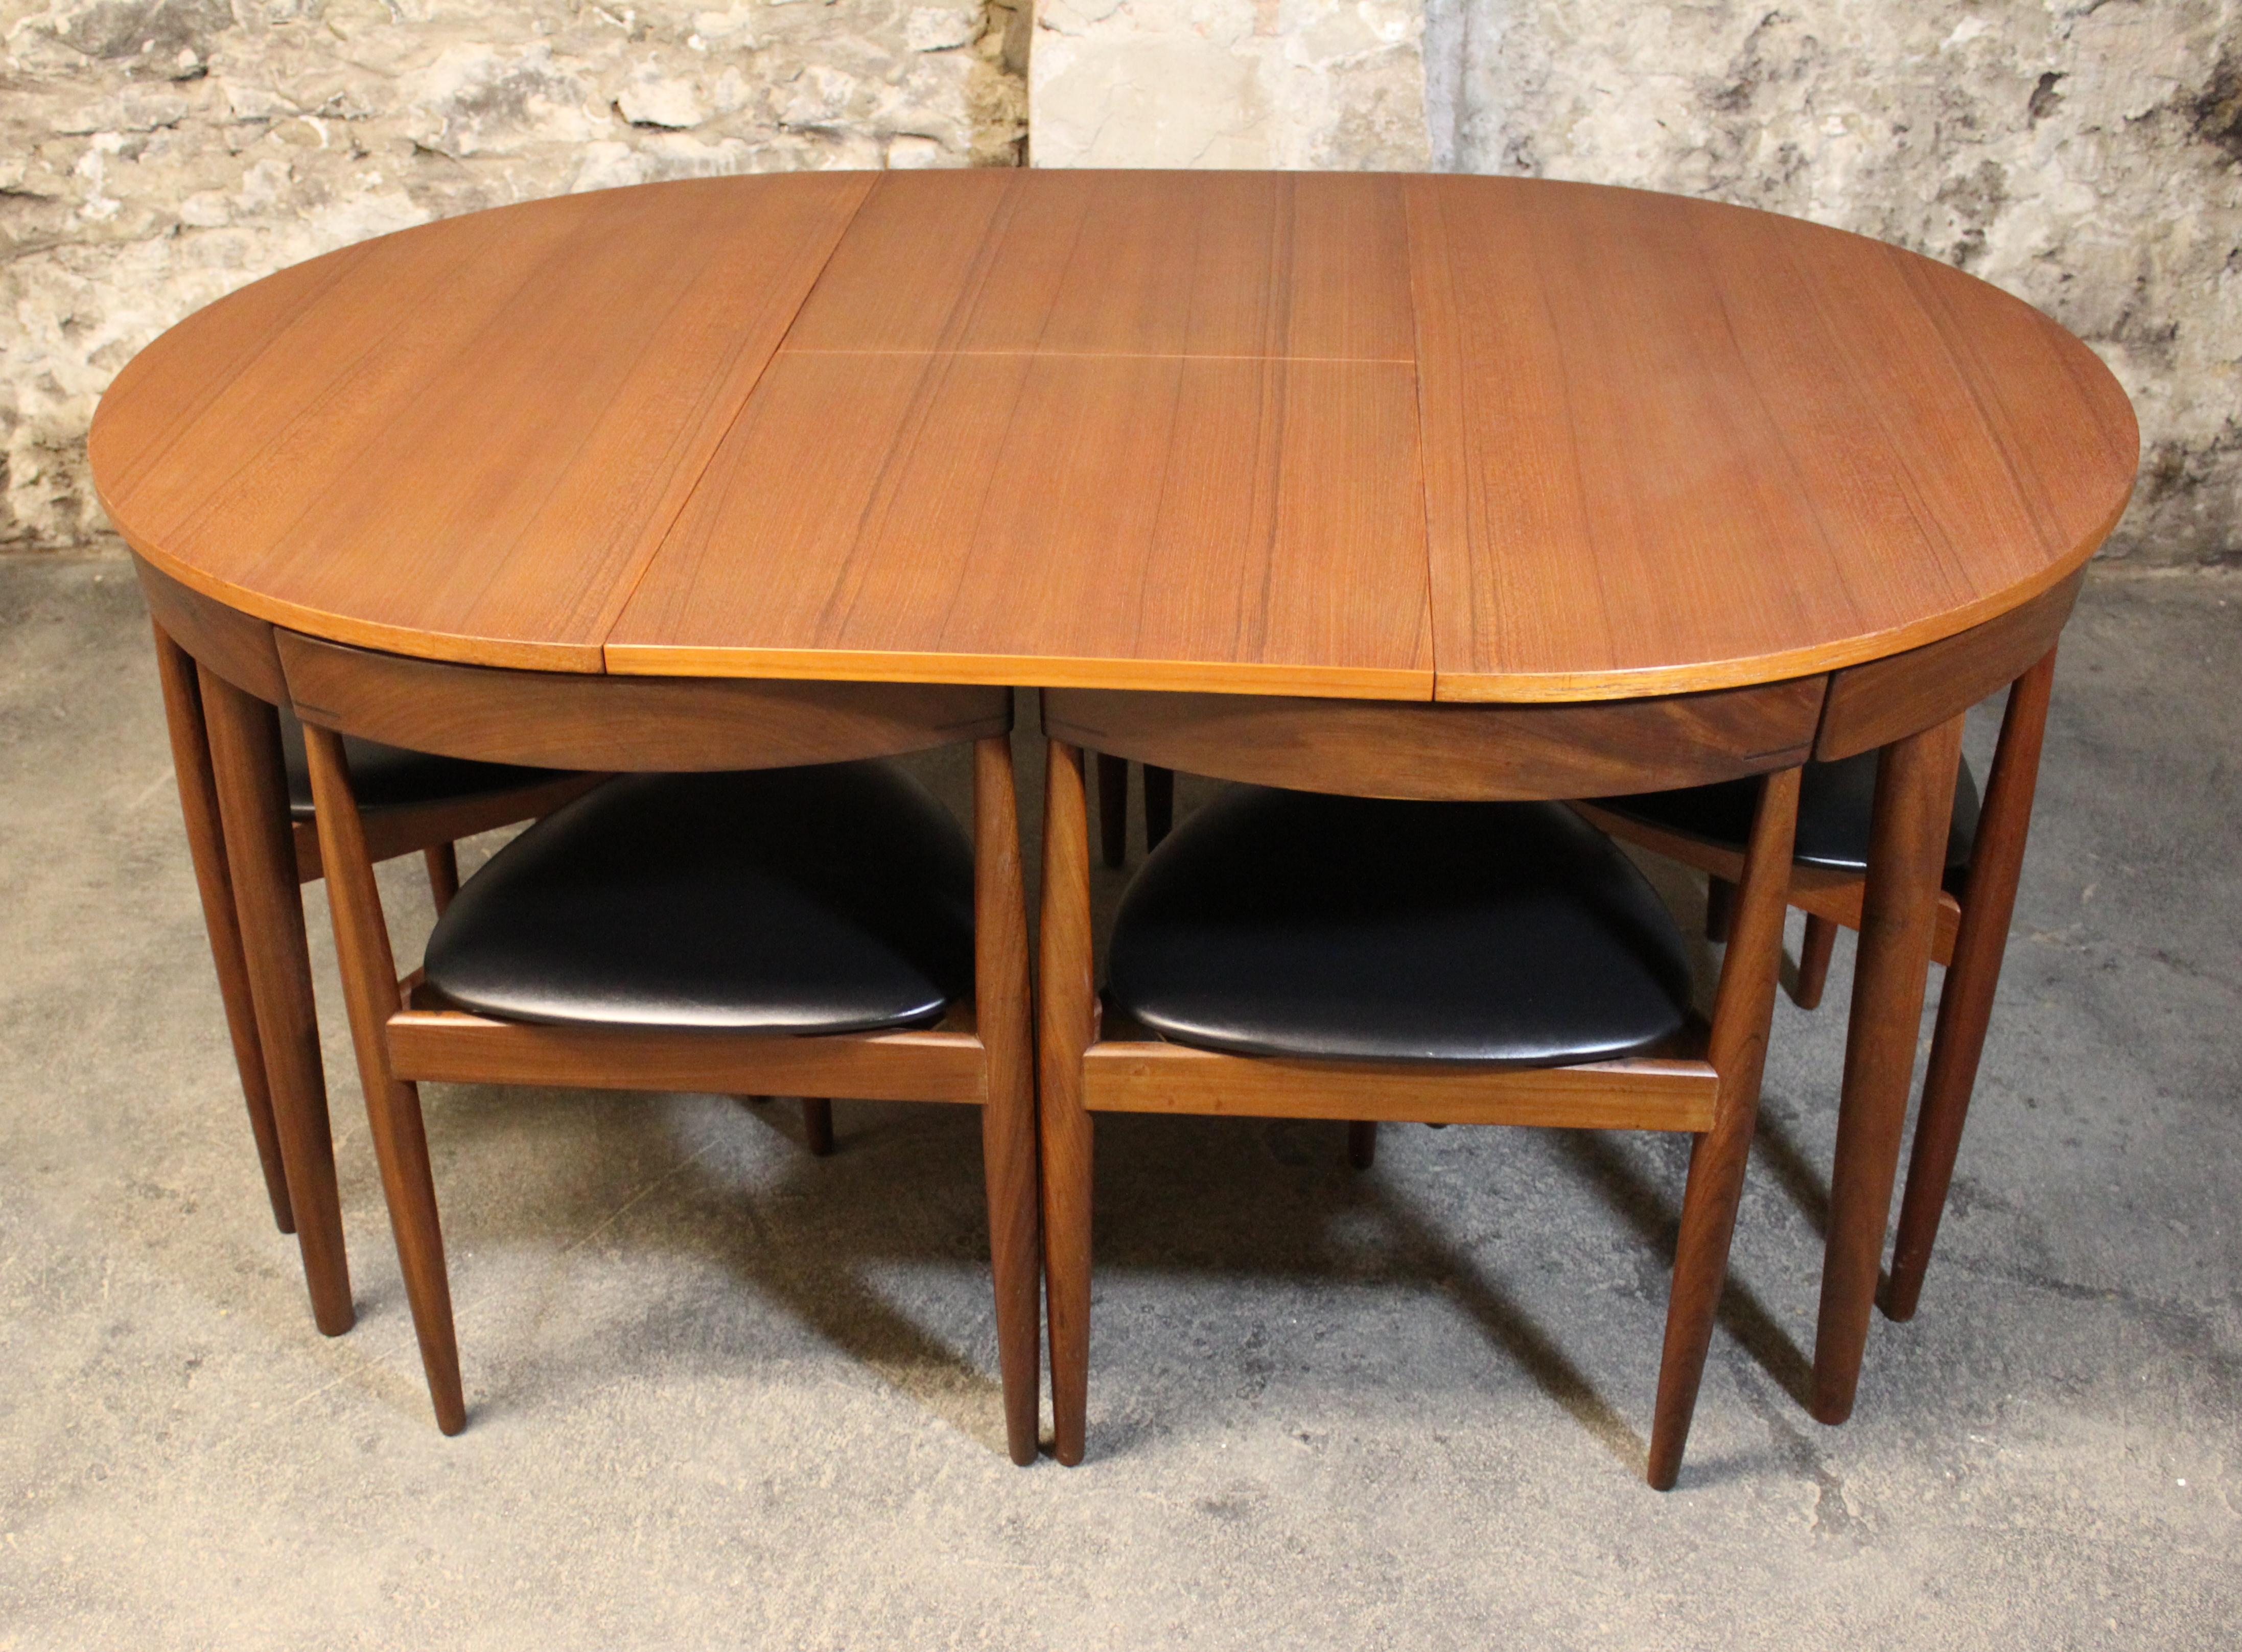 This teak Roundette model dining set, consisting of one extendable dining table and six chairs was designed by Hans Olsen, and manufactured by Frem Rojle. Made from teak, the table can be extended with a built in butterfly leaf. The striking